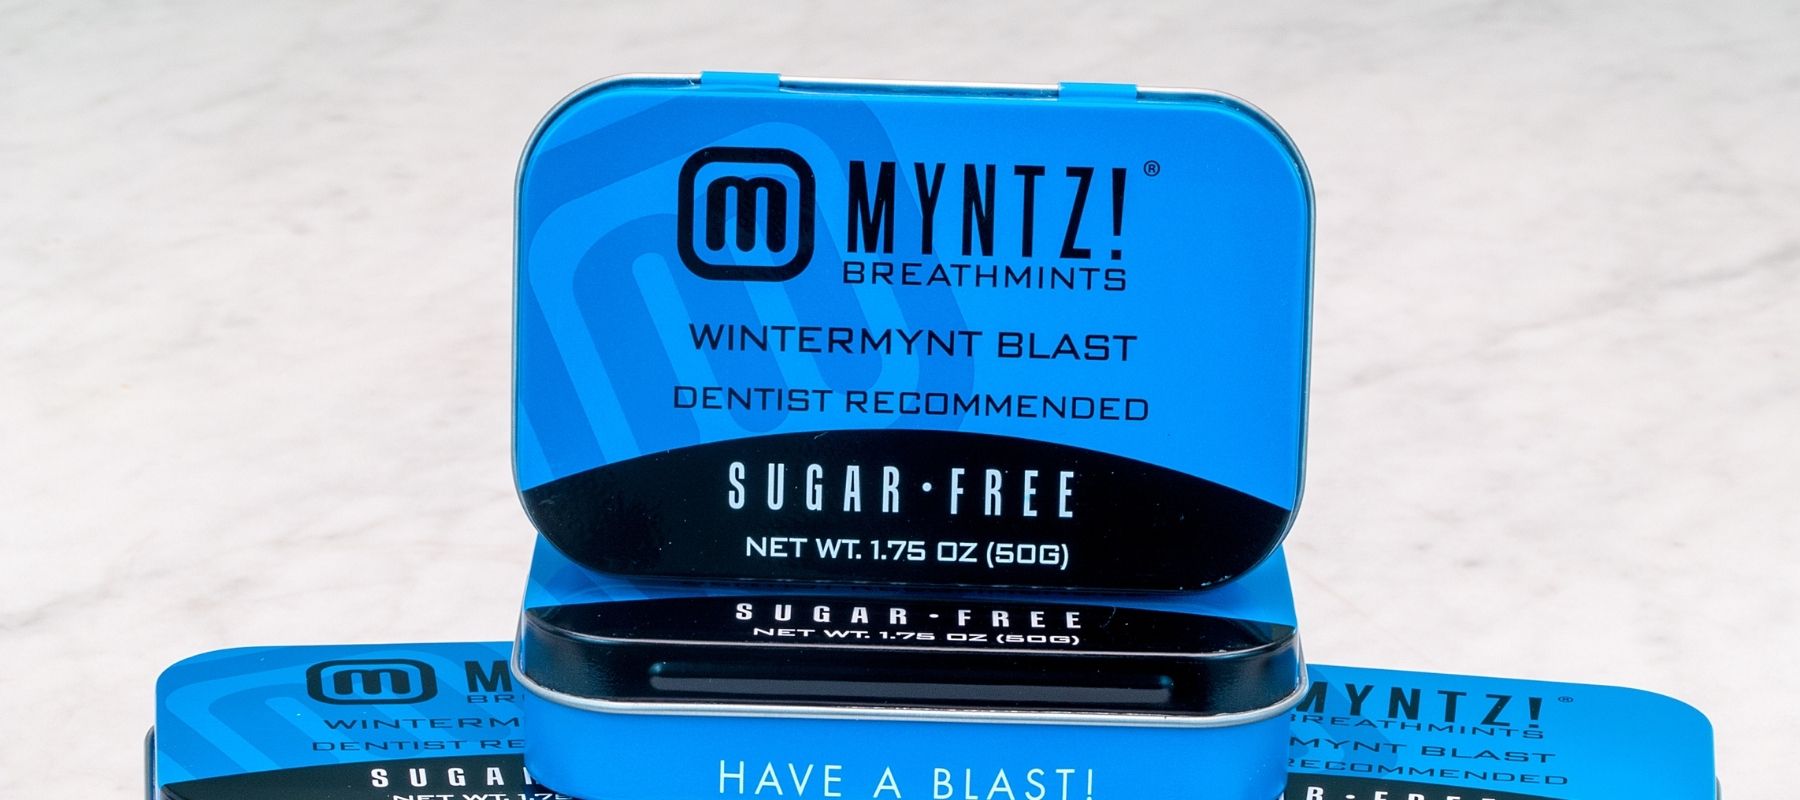 Myntz! Breathmints stacked on top of each other in a pyramid